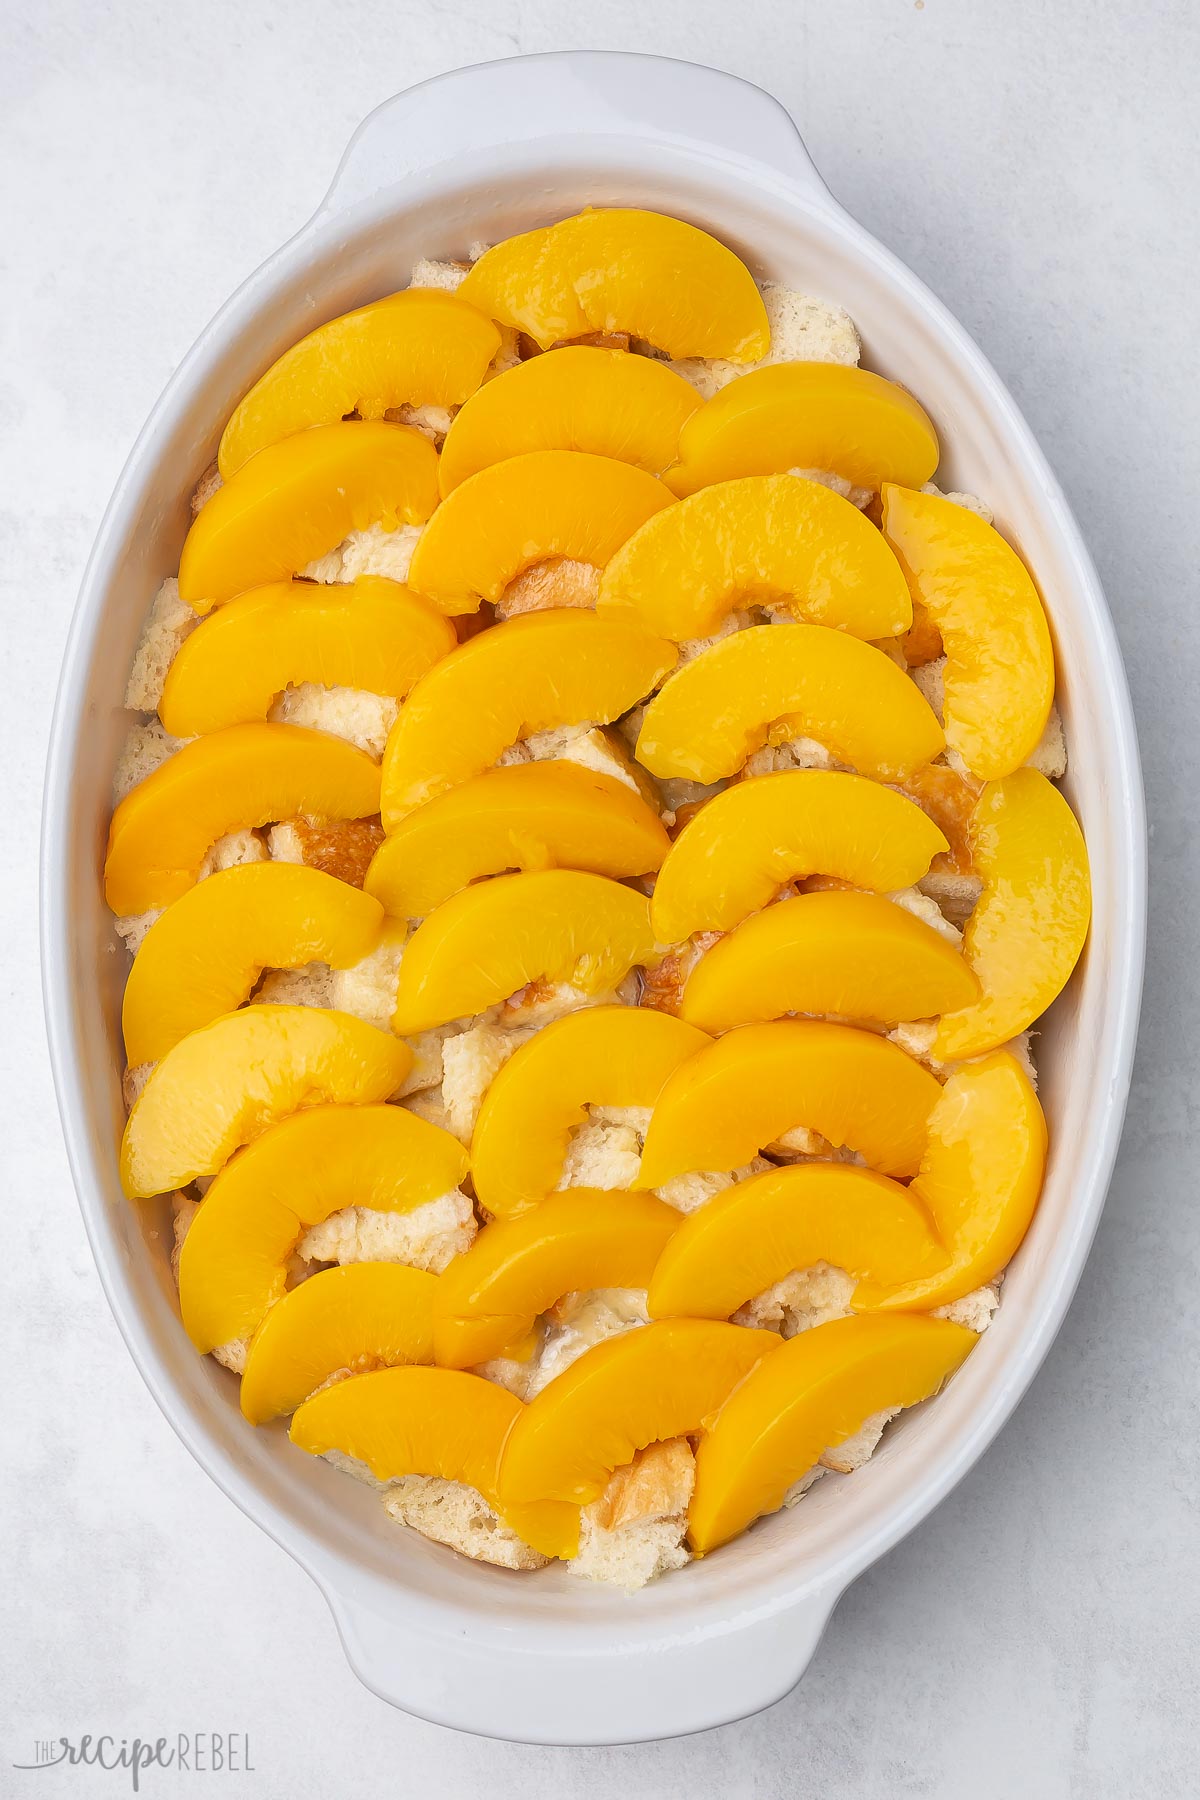 Top view of a casserole dish with peach slices covering bread cubes lined in a single layer.